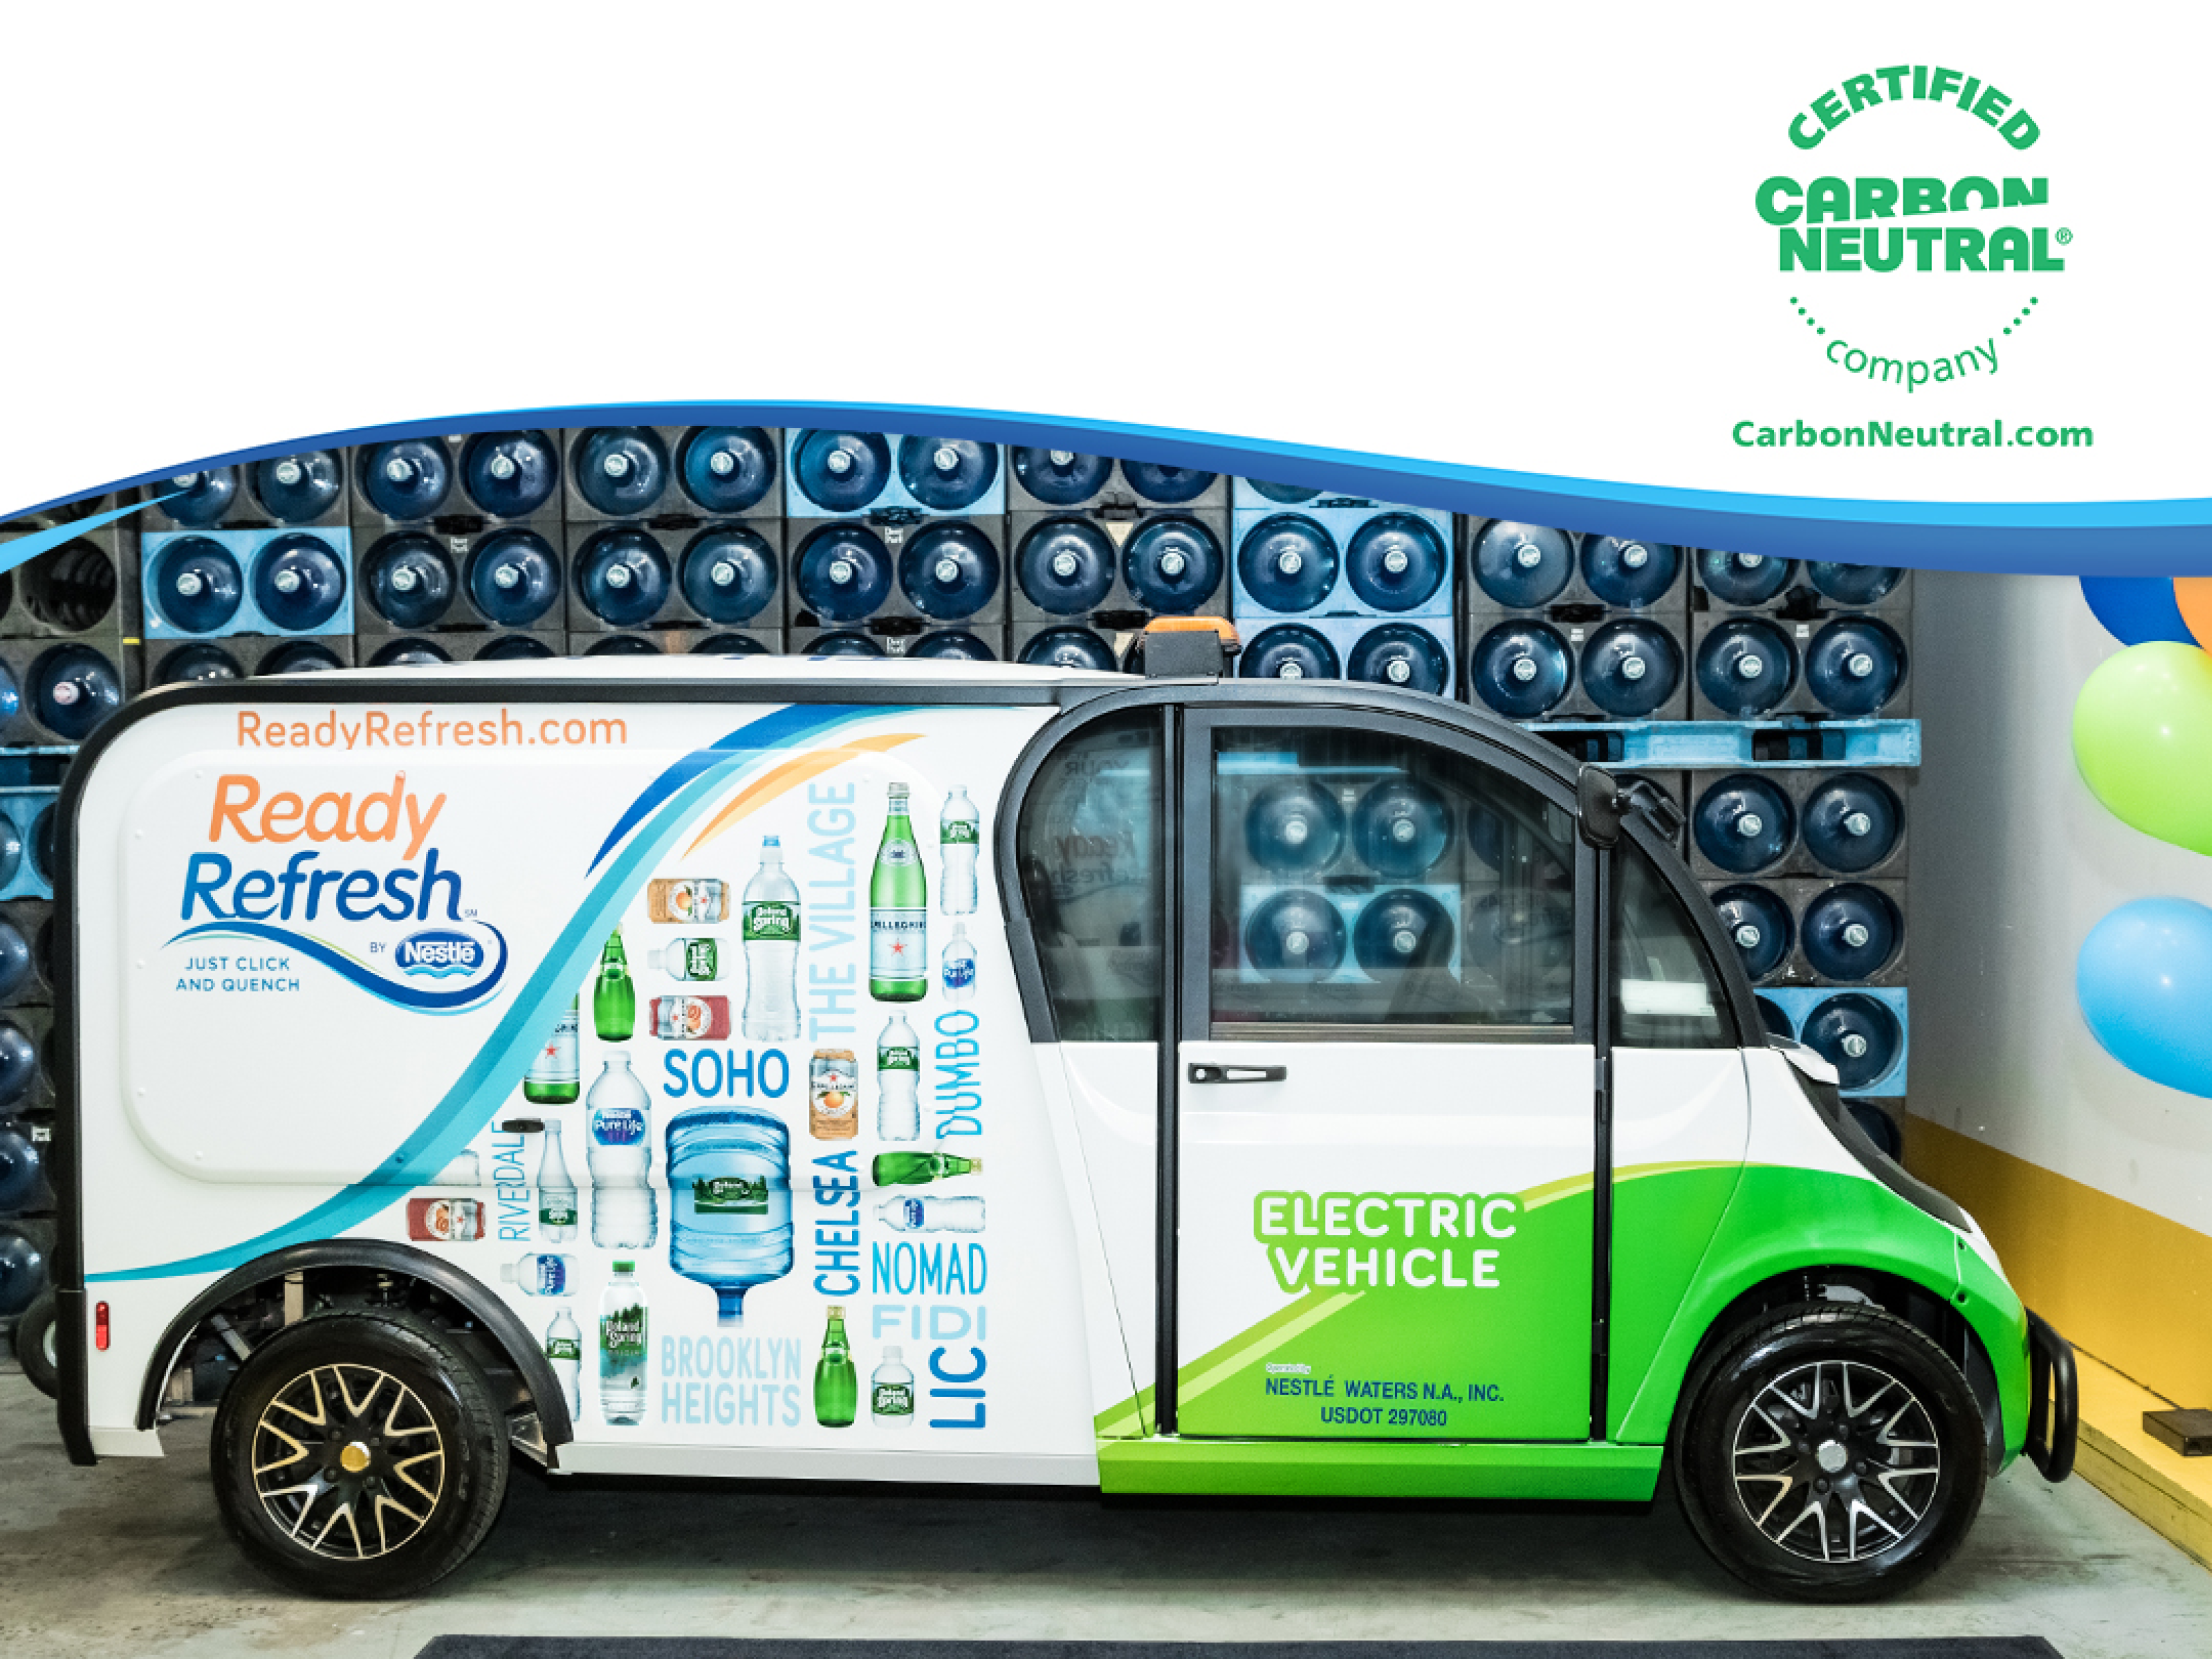 Nestlé Waters North America beverage delivery arm reaches carbon neutrality